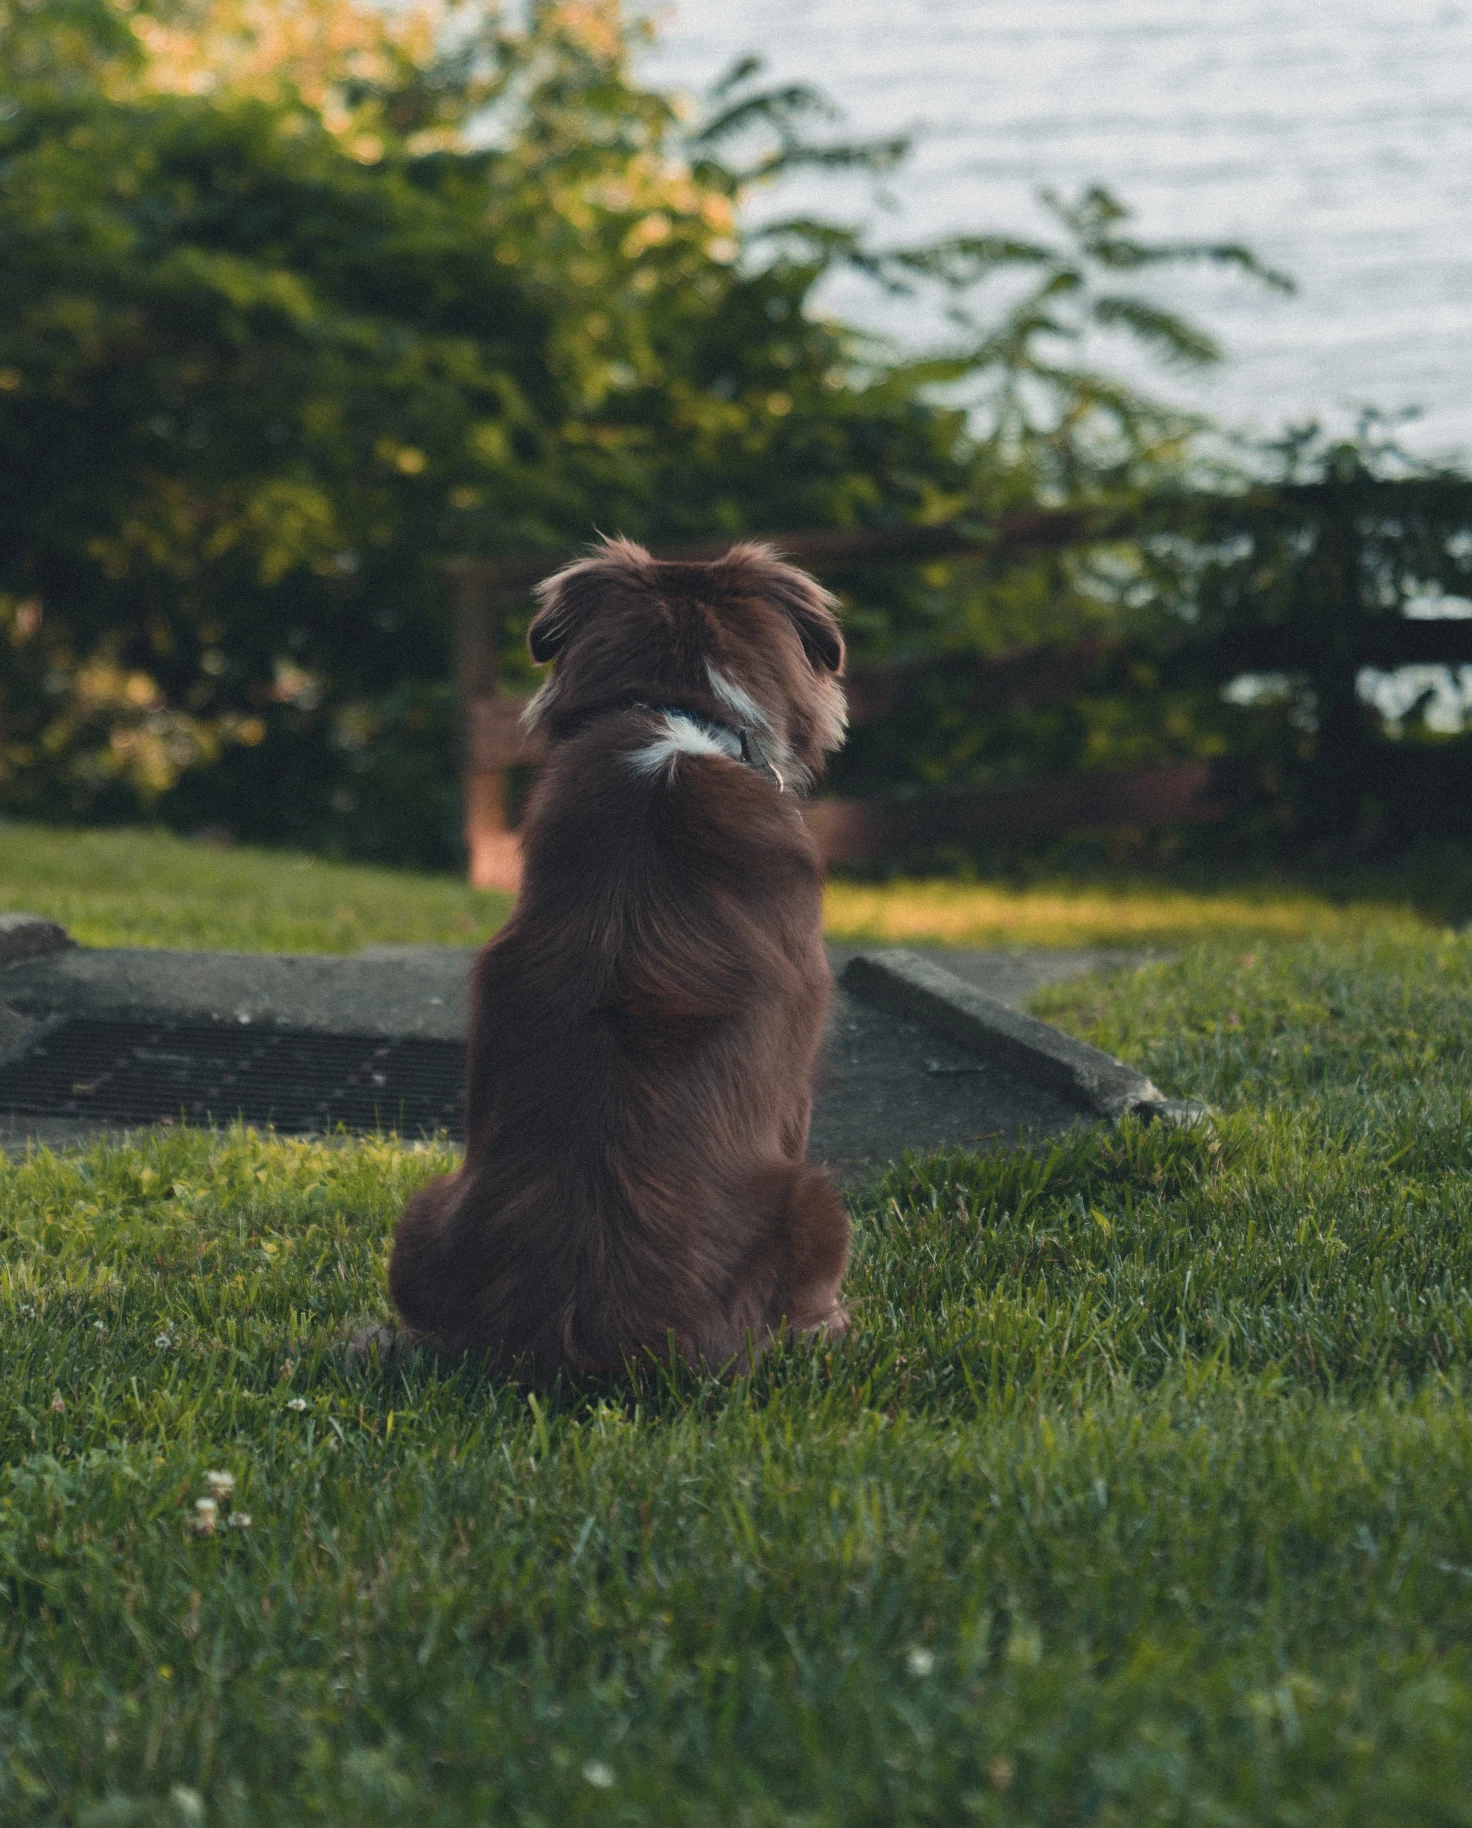 Brown dog sits on the grass and faces the water in the distance